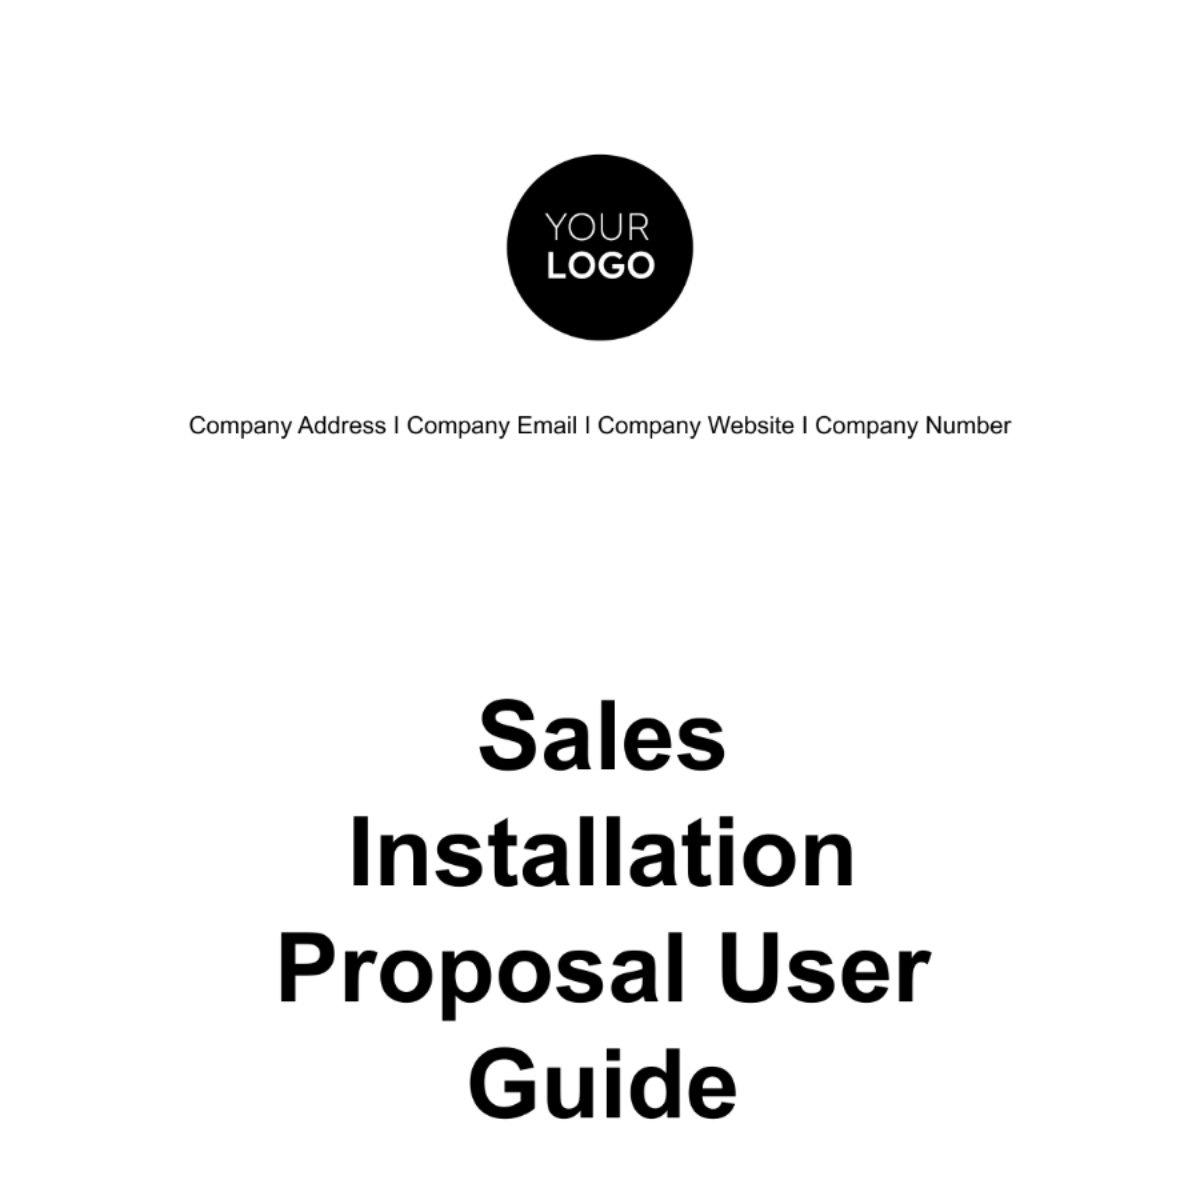 Sales Installation Proposal User Guide Template